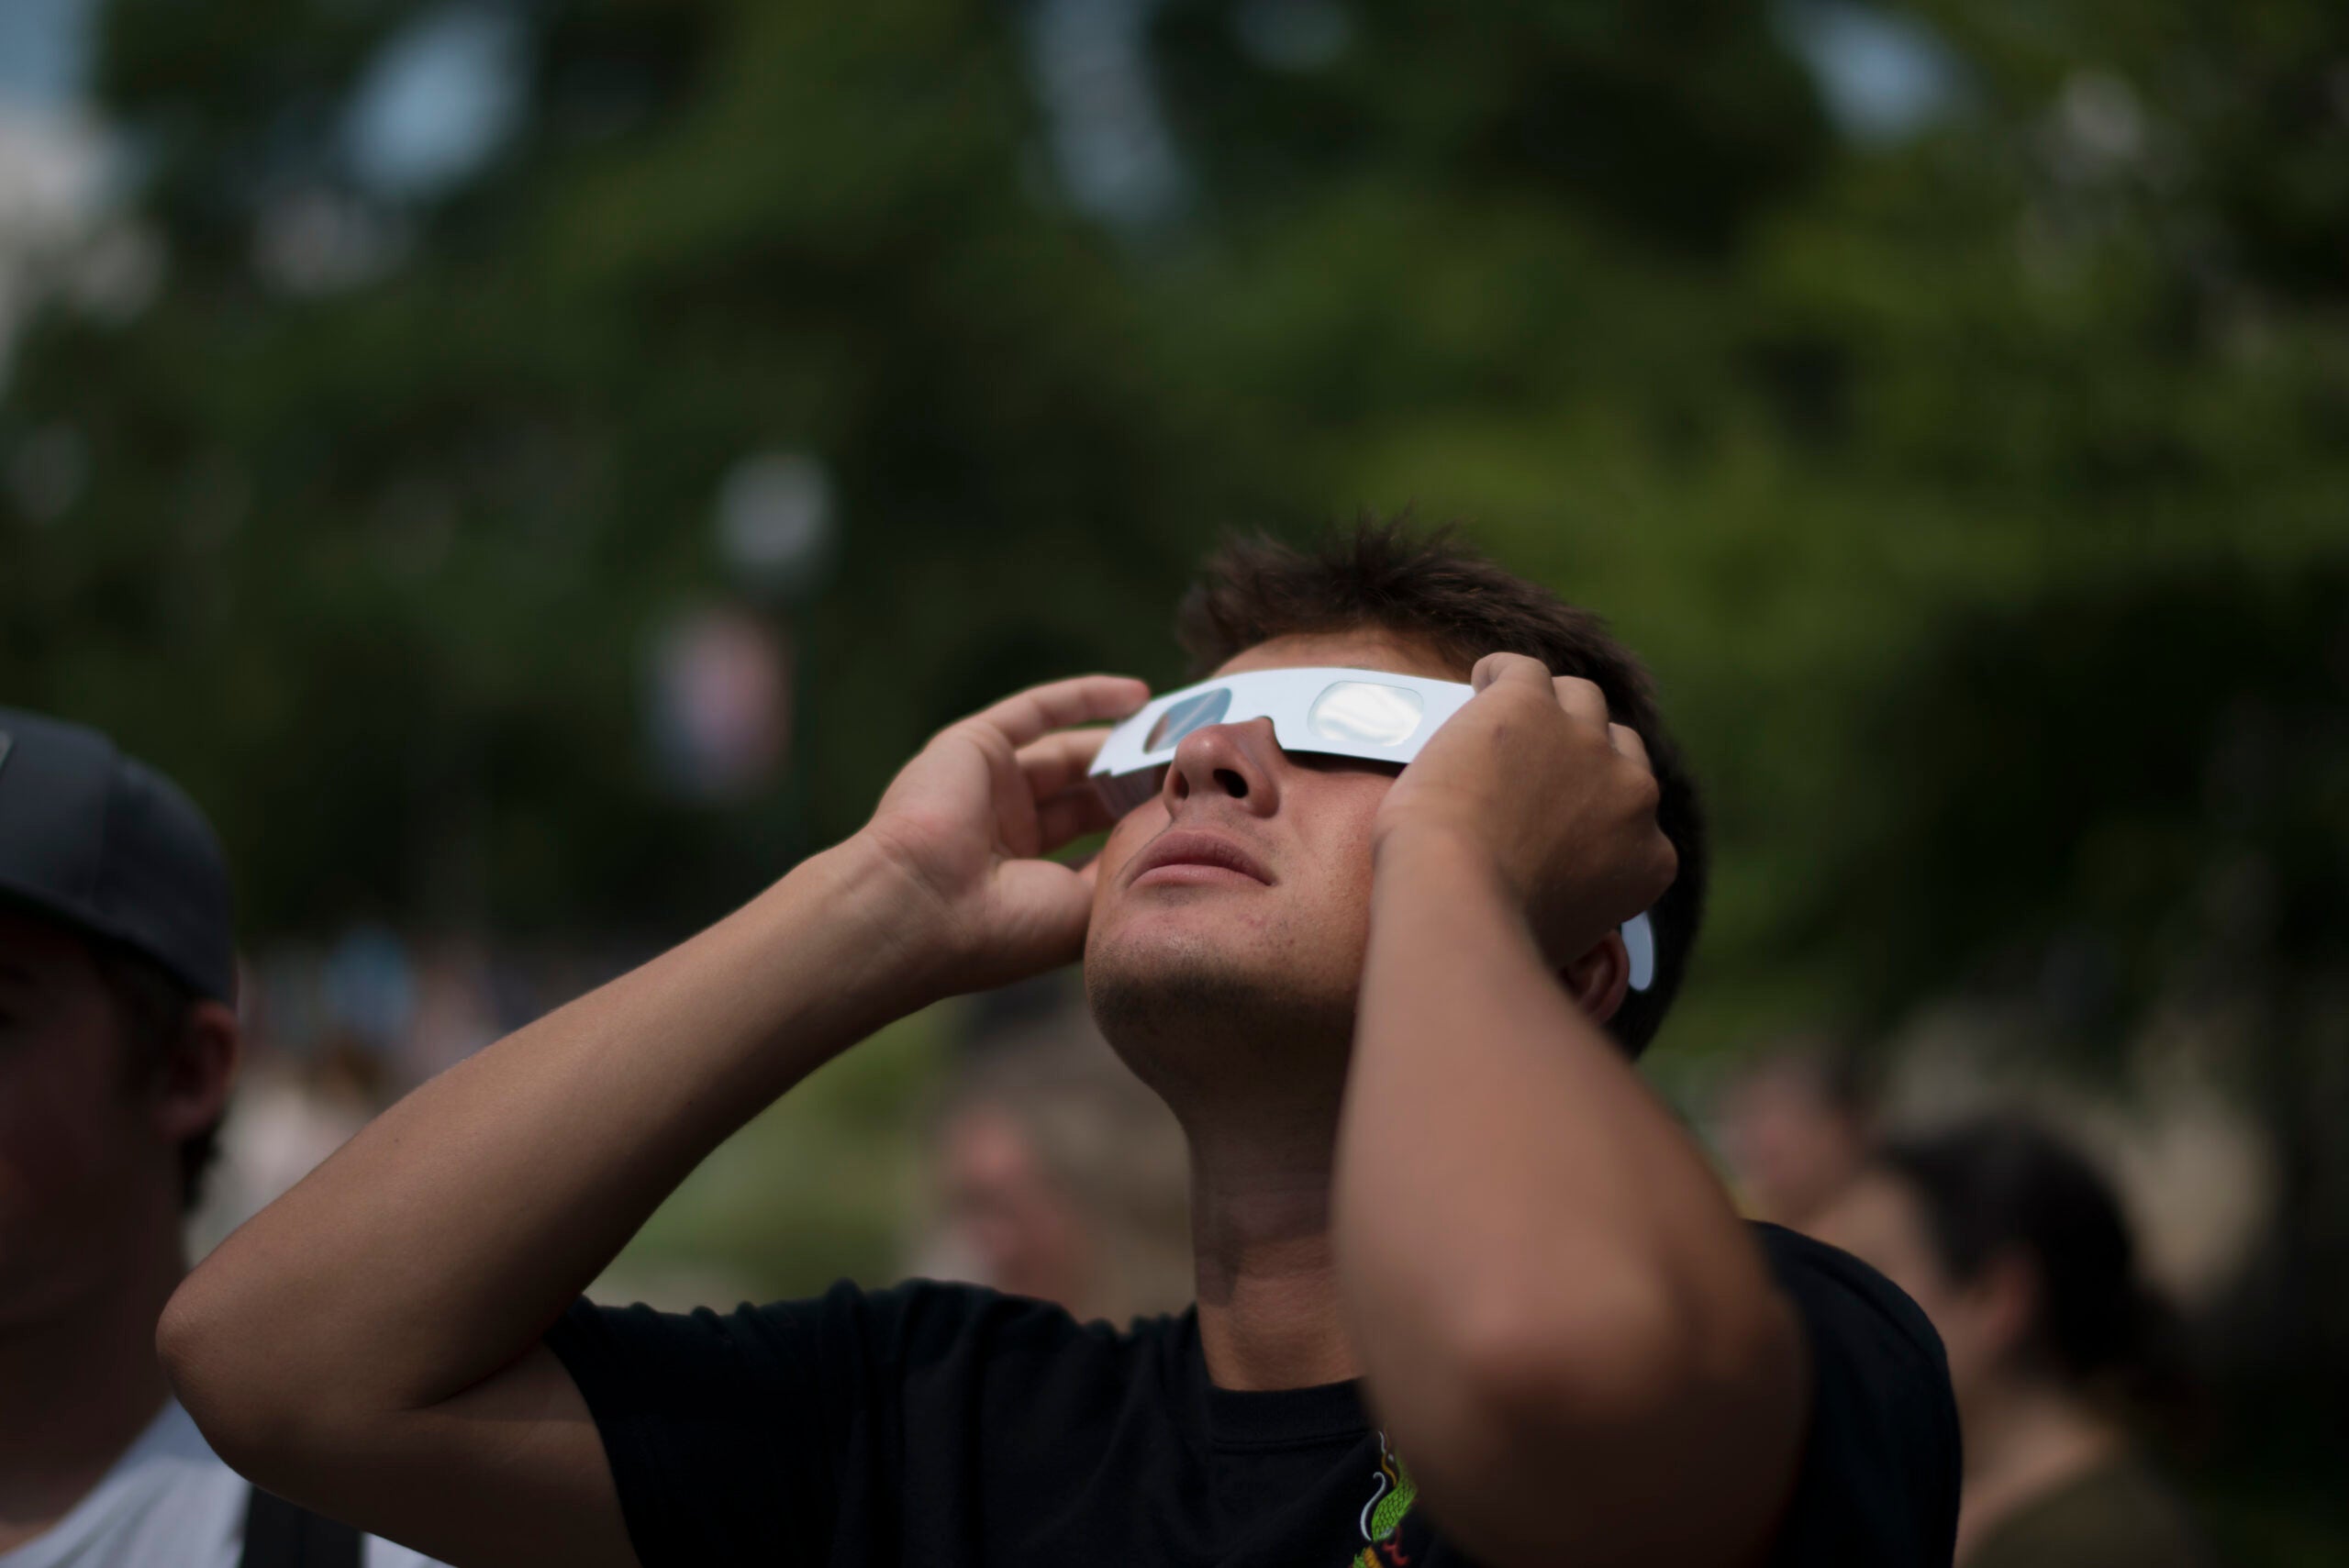 Young man looking up at solar eclipse wearing paper protective glasses